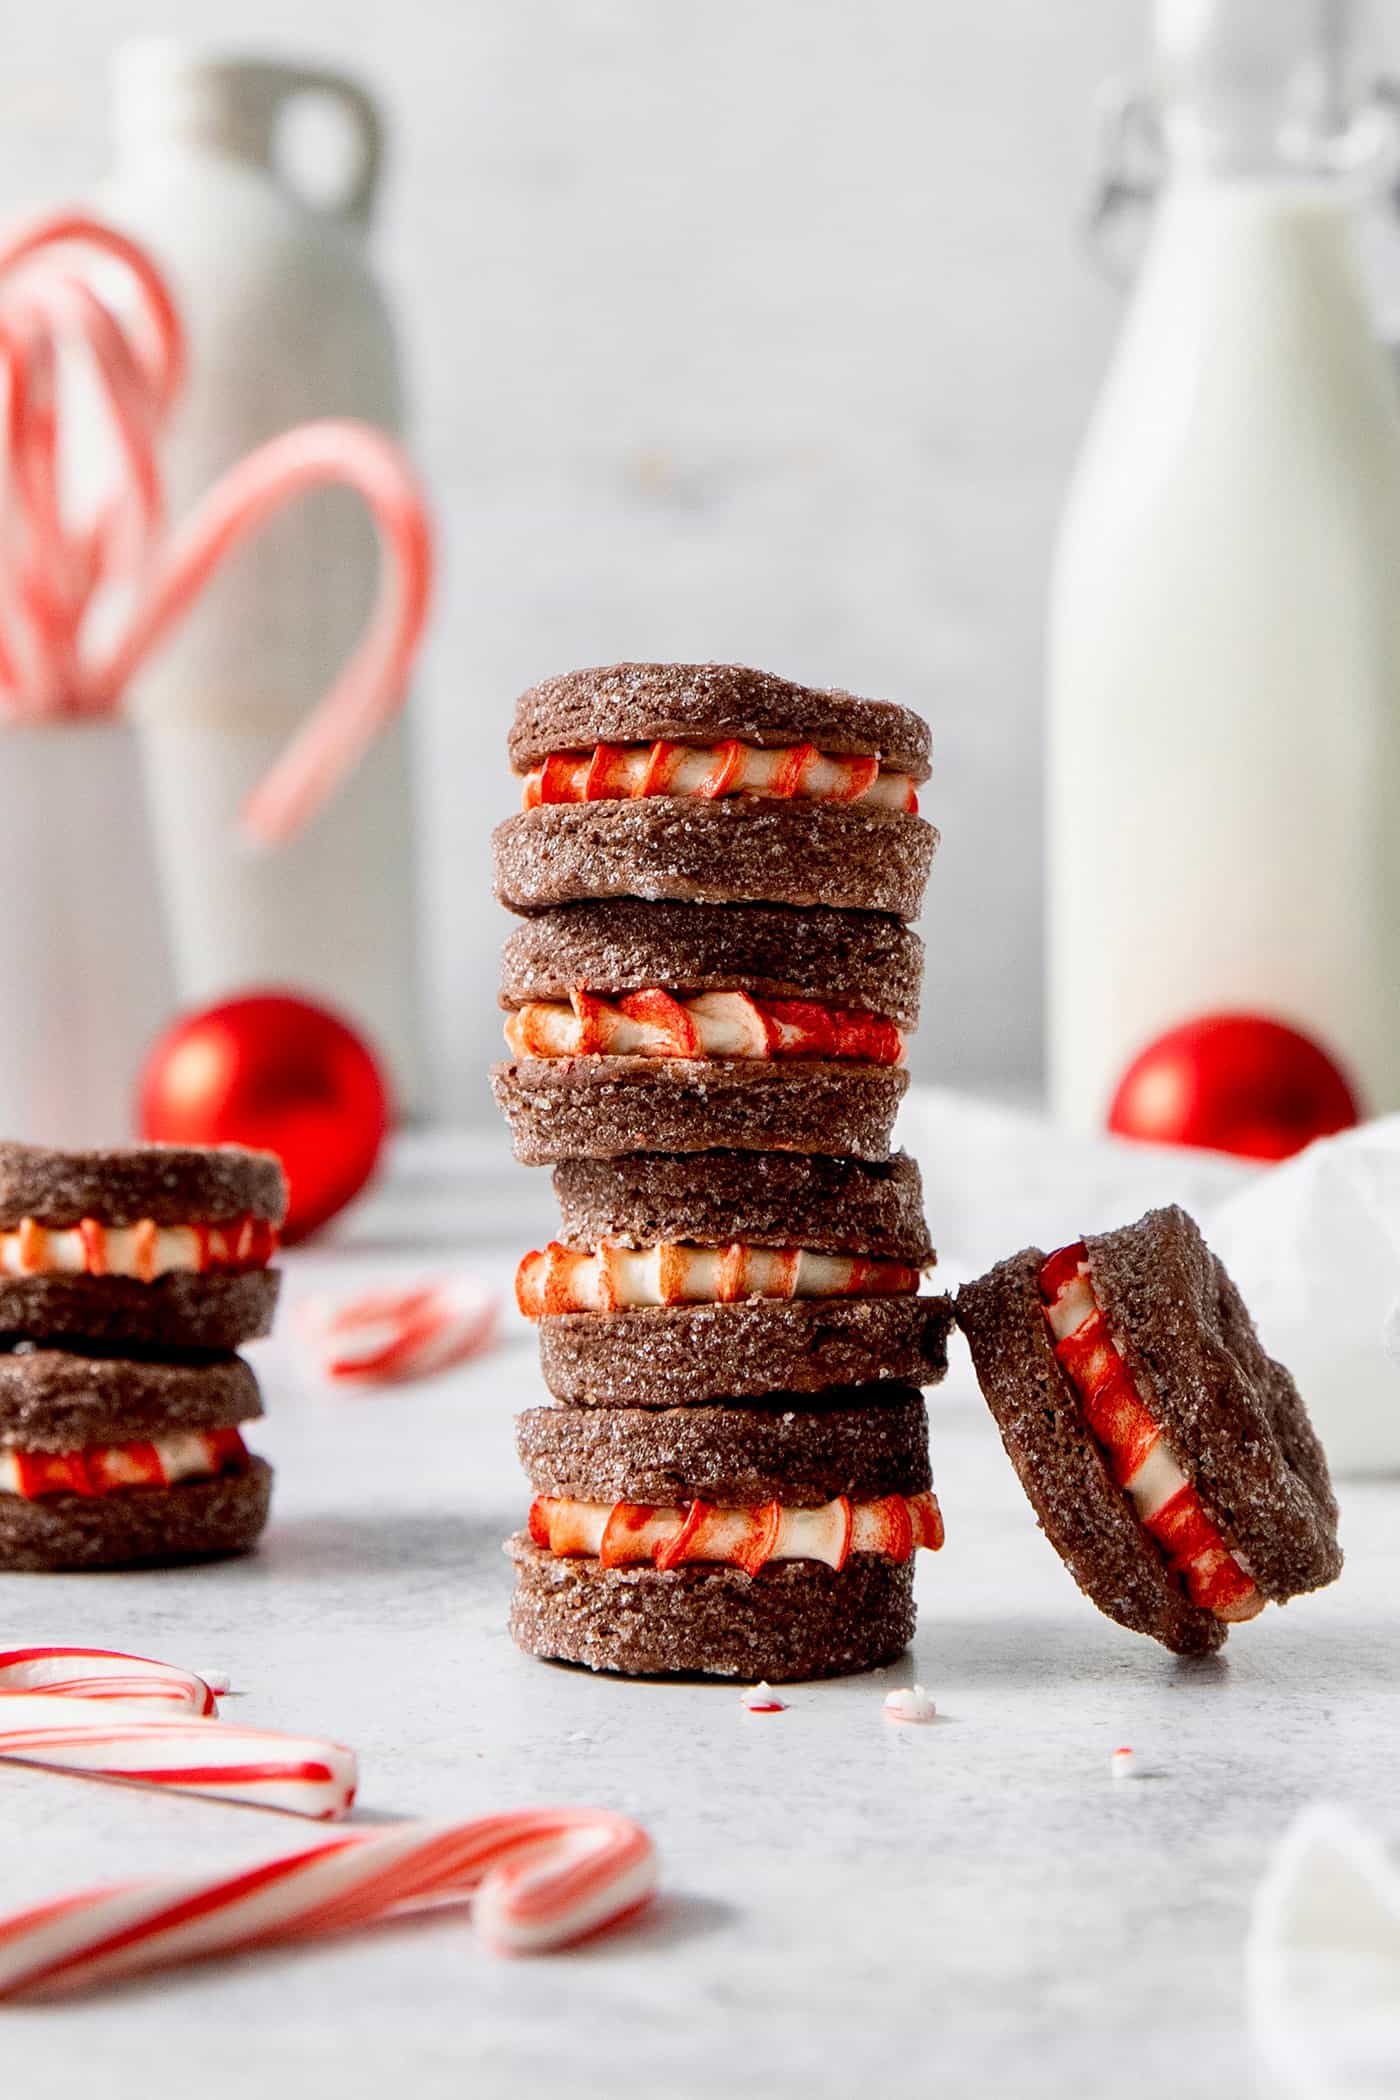 A stack of three chocolate wafer cookies with peppermint filling and more scattered nearby.